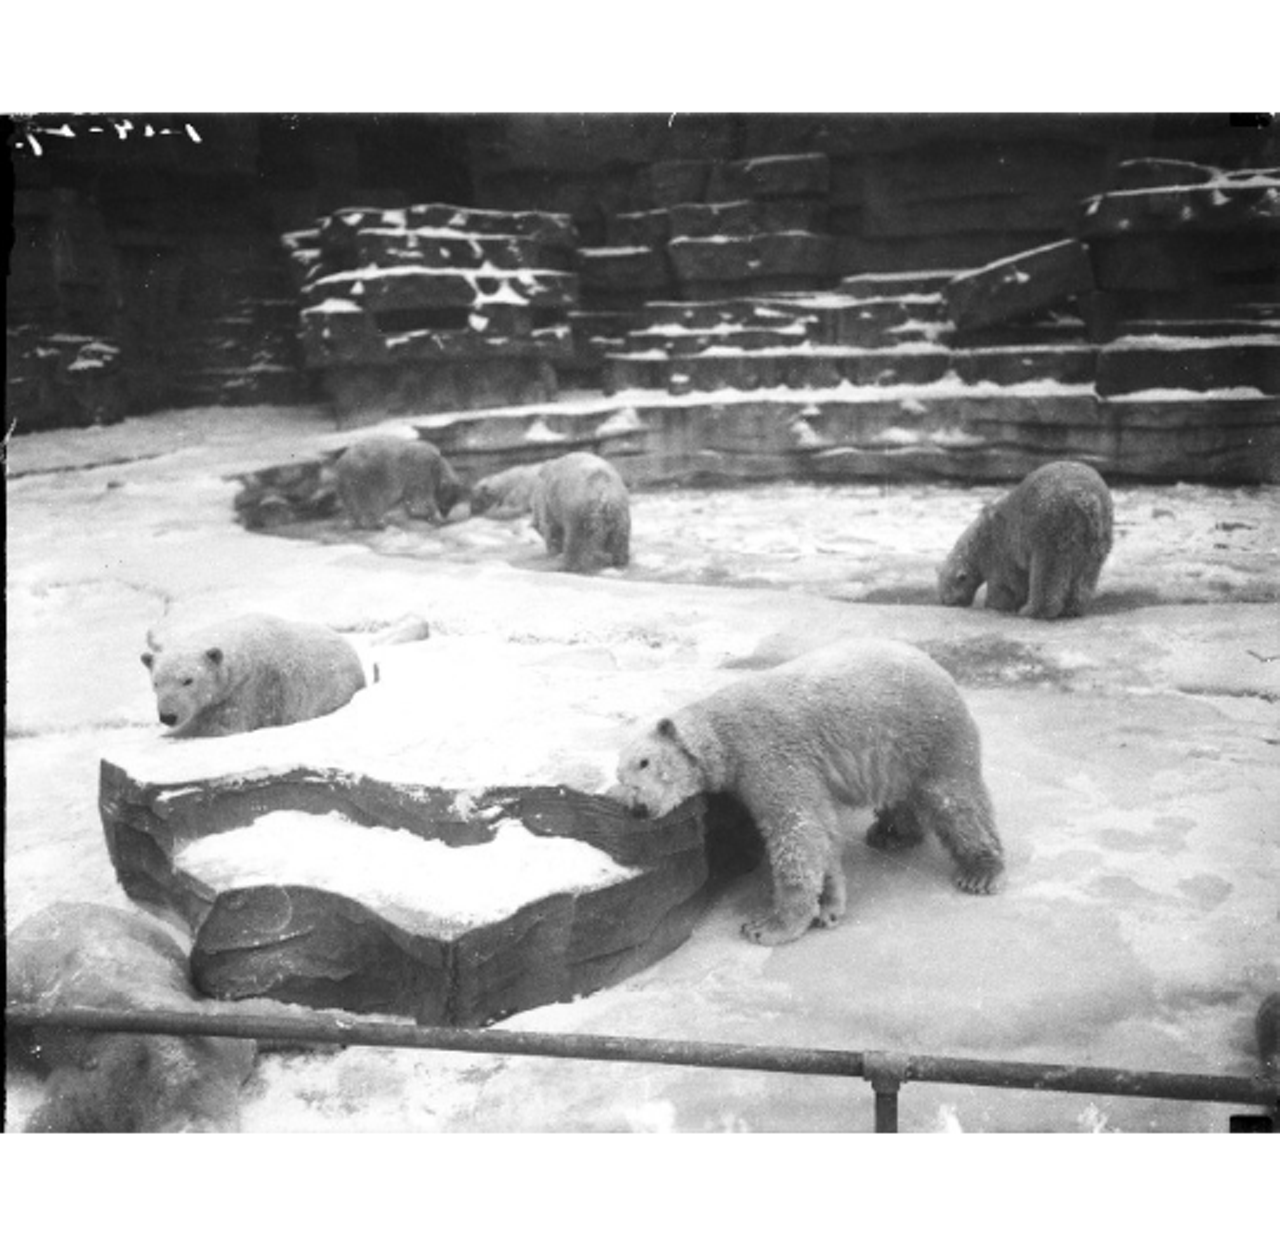 Polar bears doin what they do. (Date unknown)